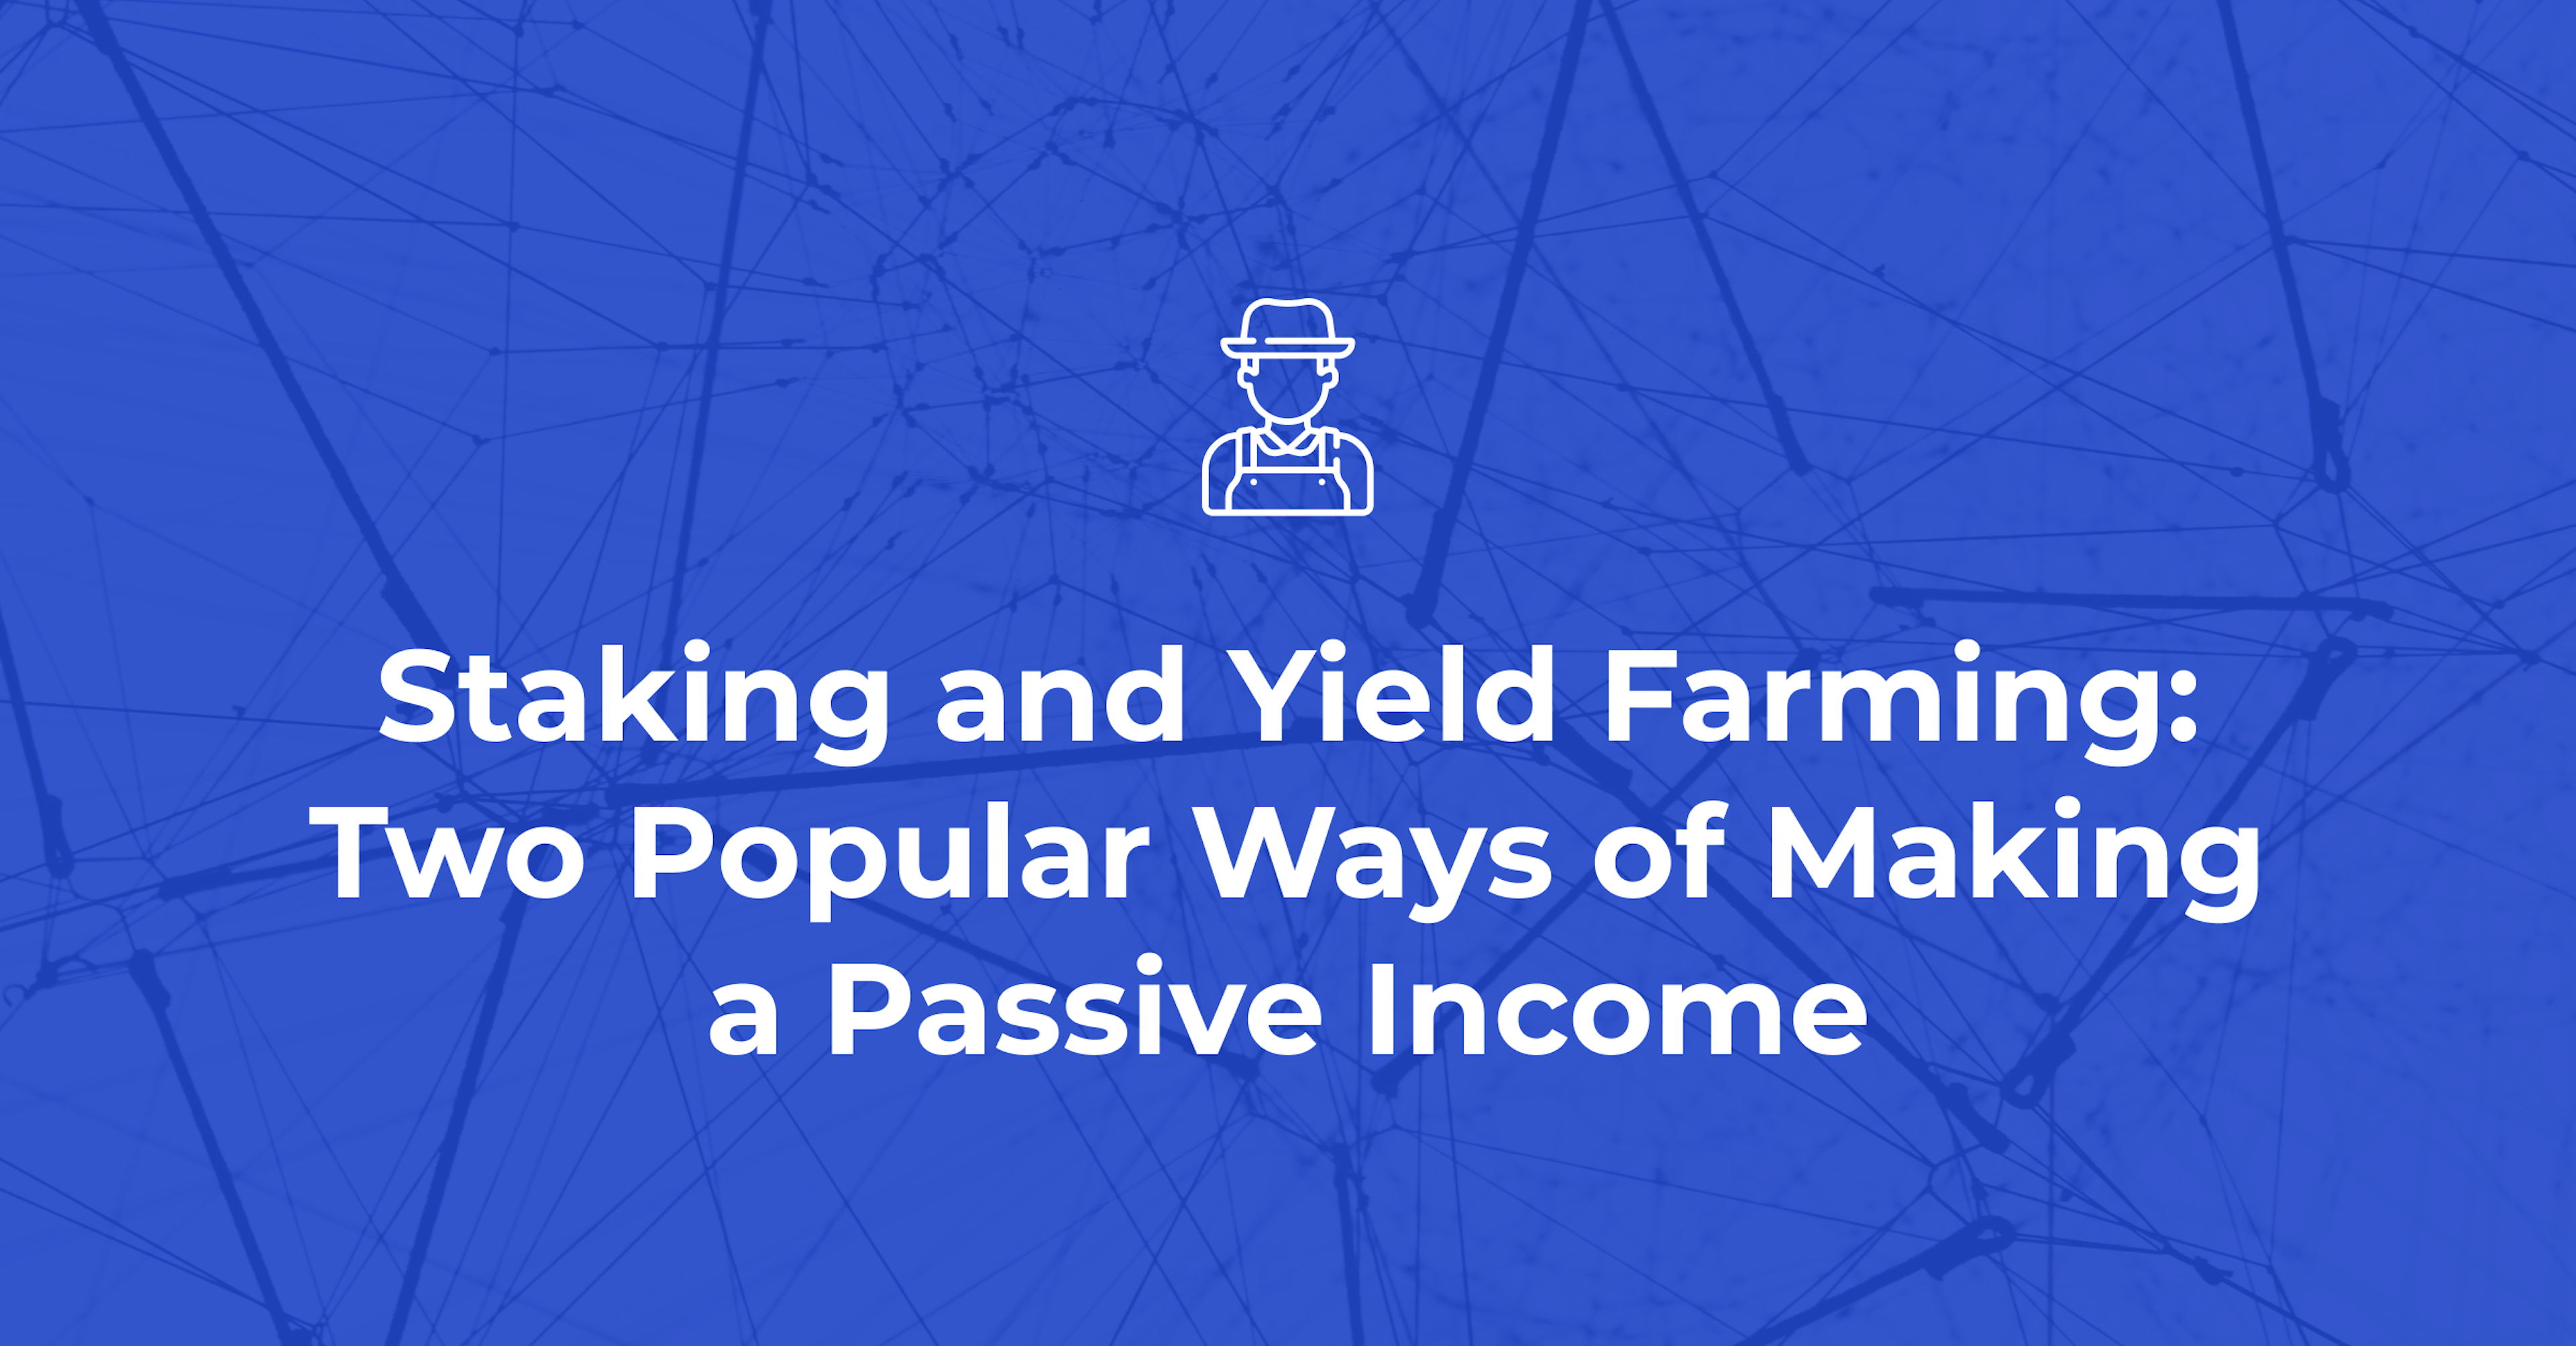 Staking and Yield Farming: Two Popular Ways of Making a Passive Income